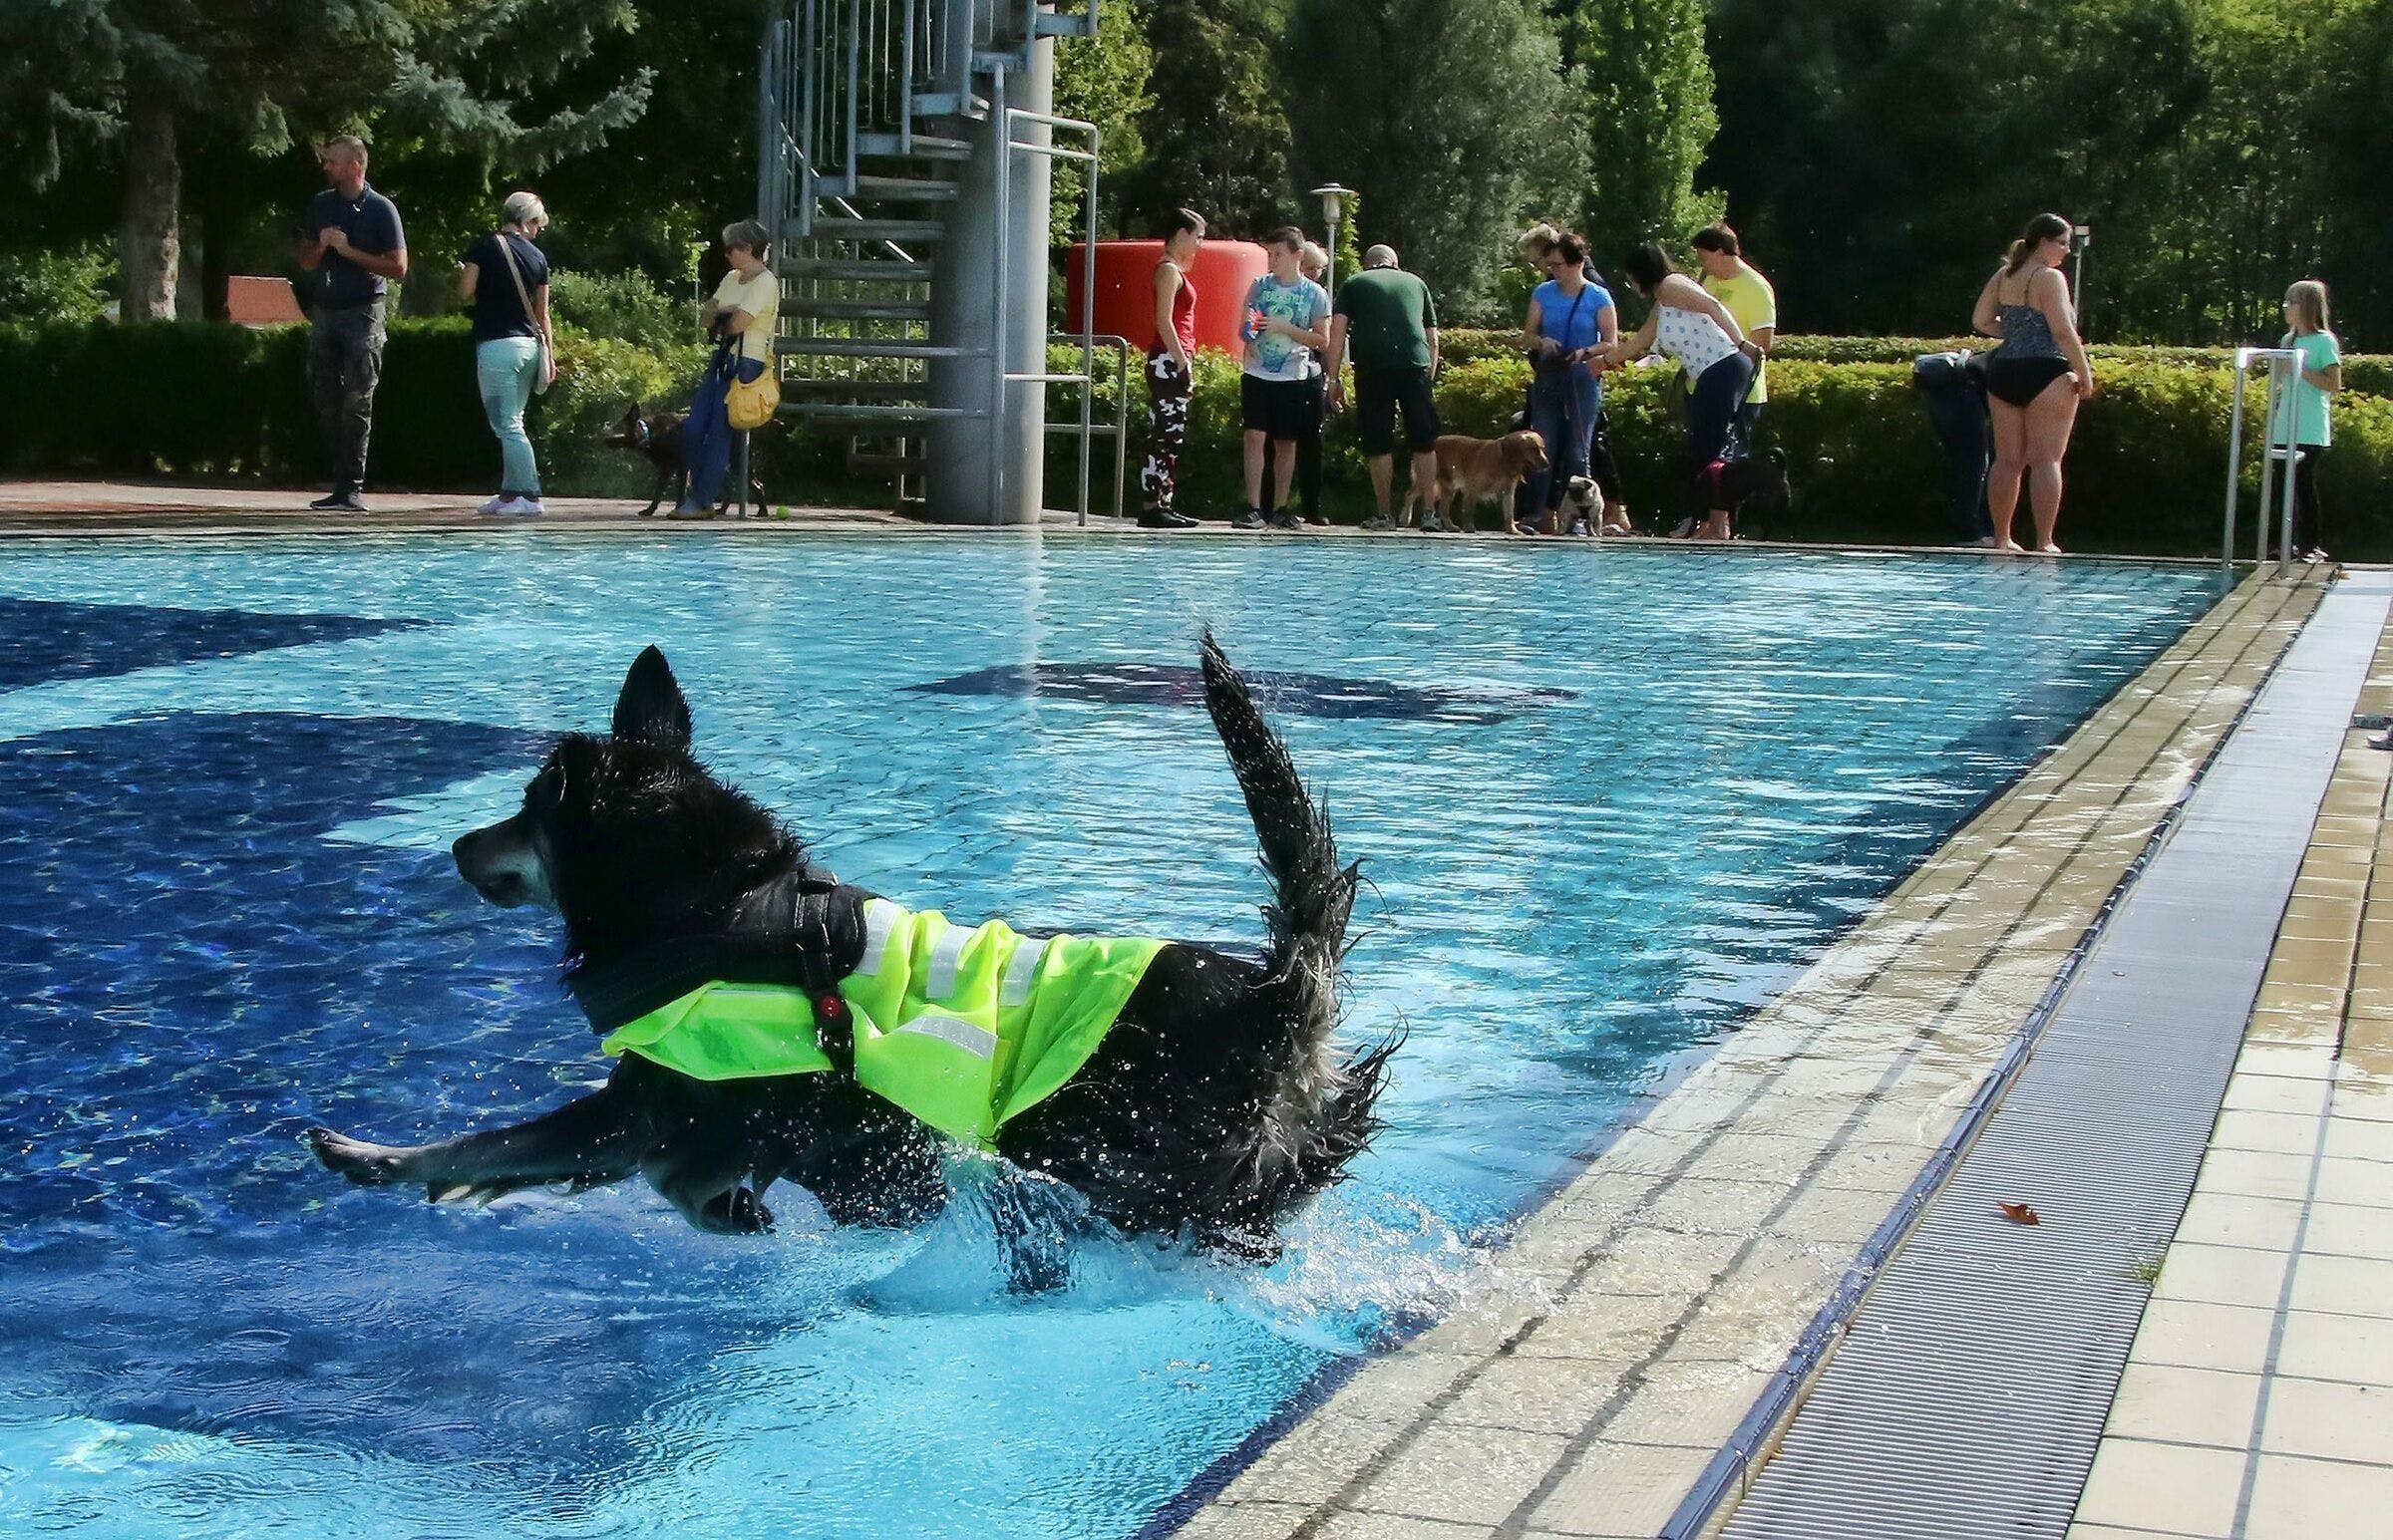 The outdoor pools in the Sangerhäuser region see no need to spend a day bathing the dogs